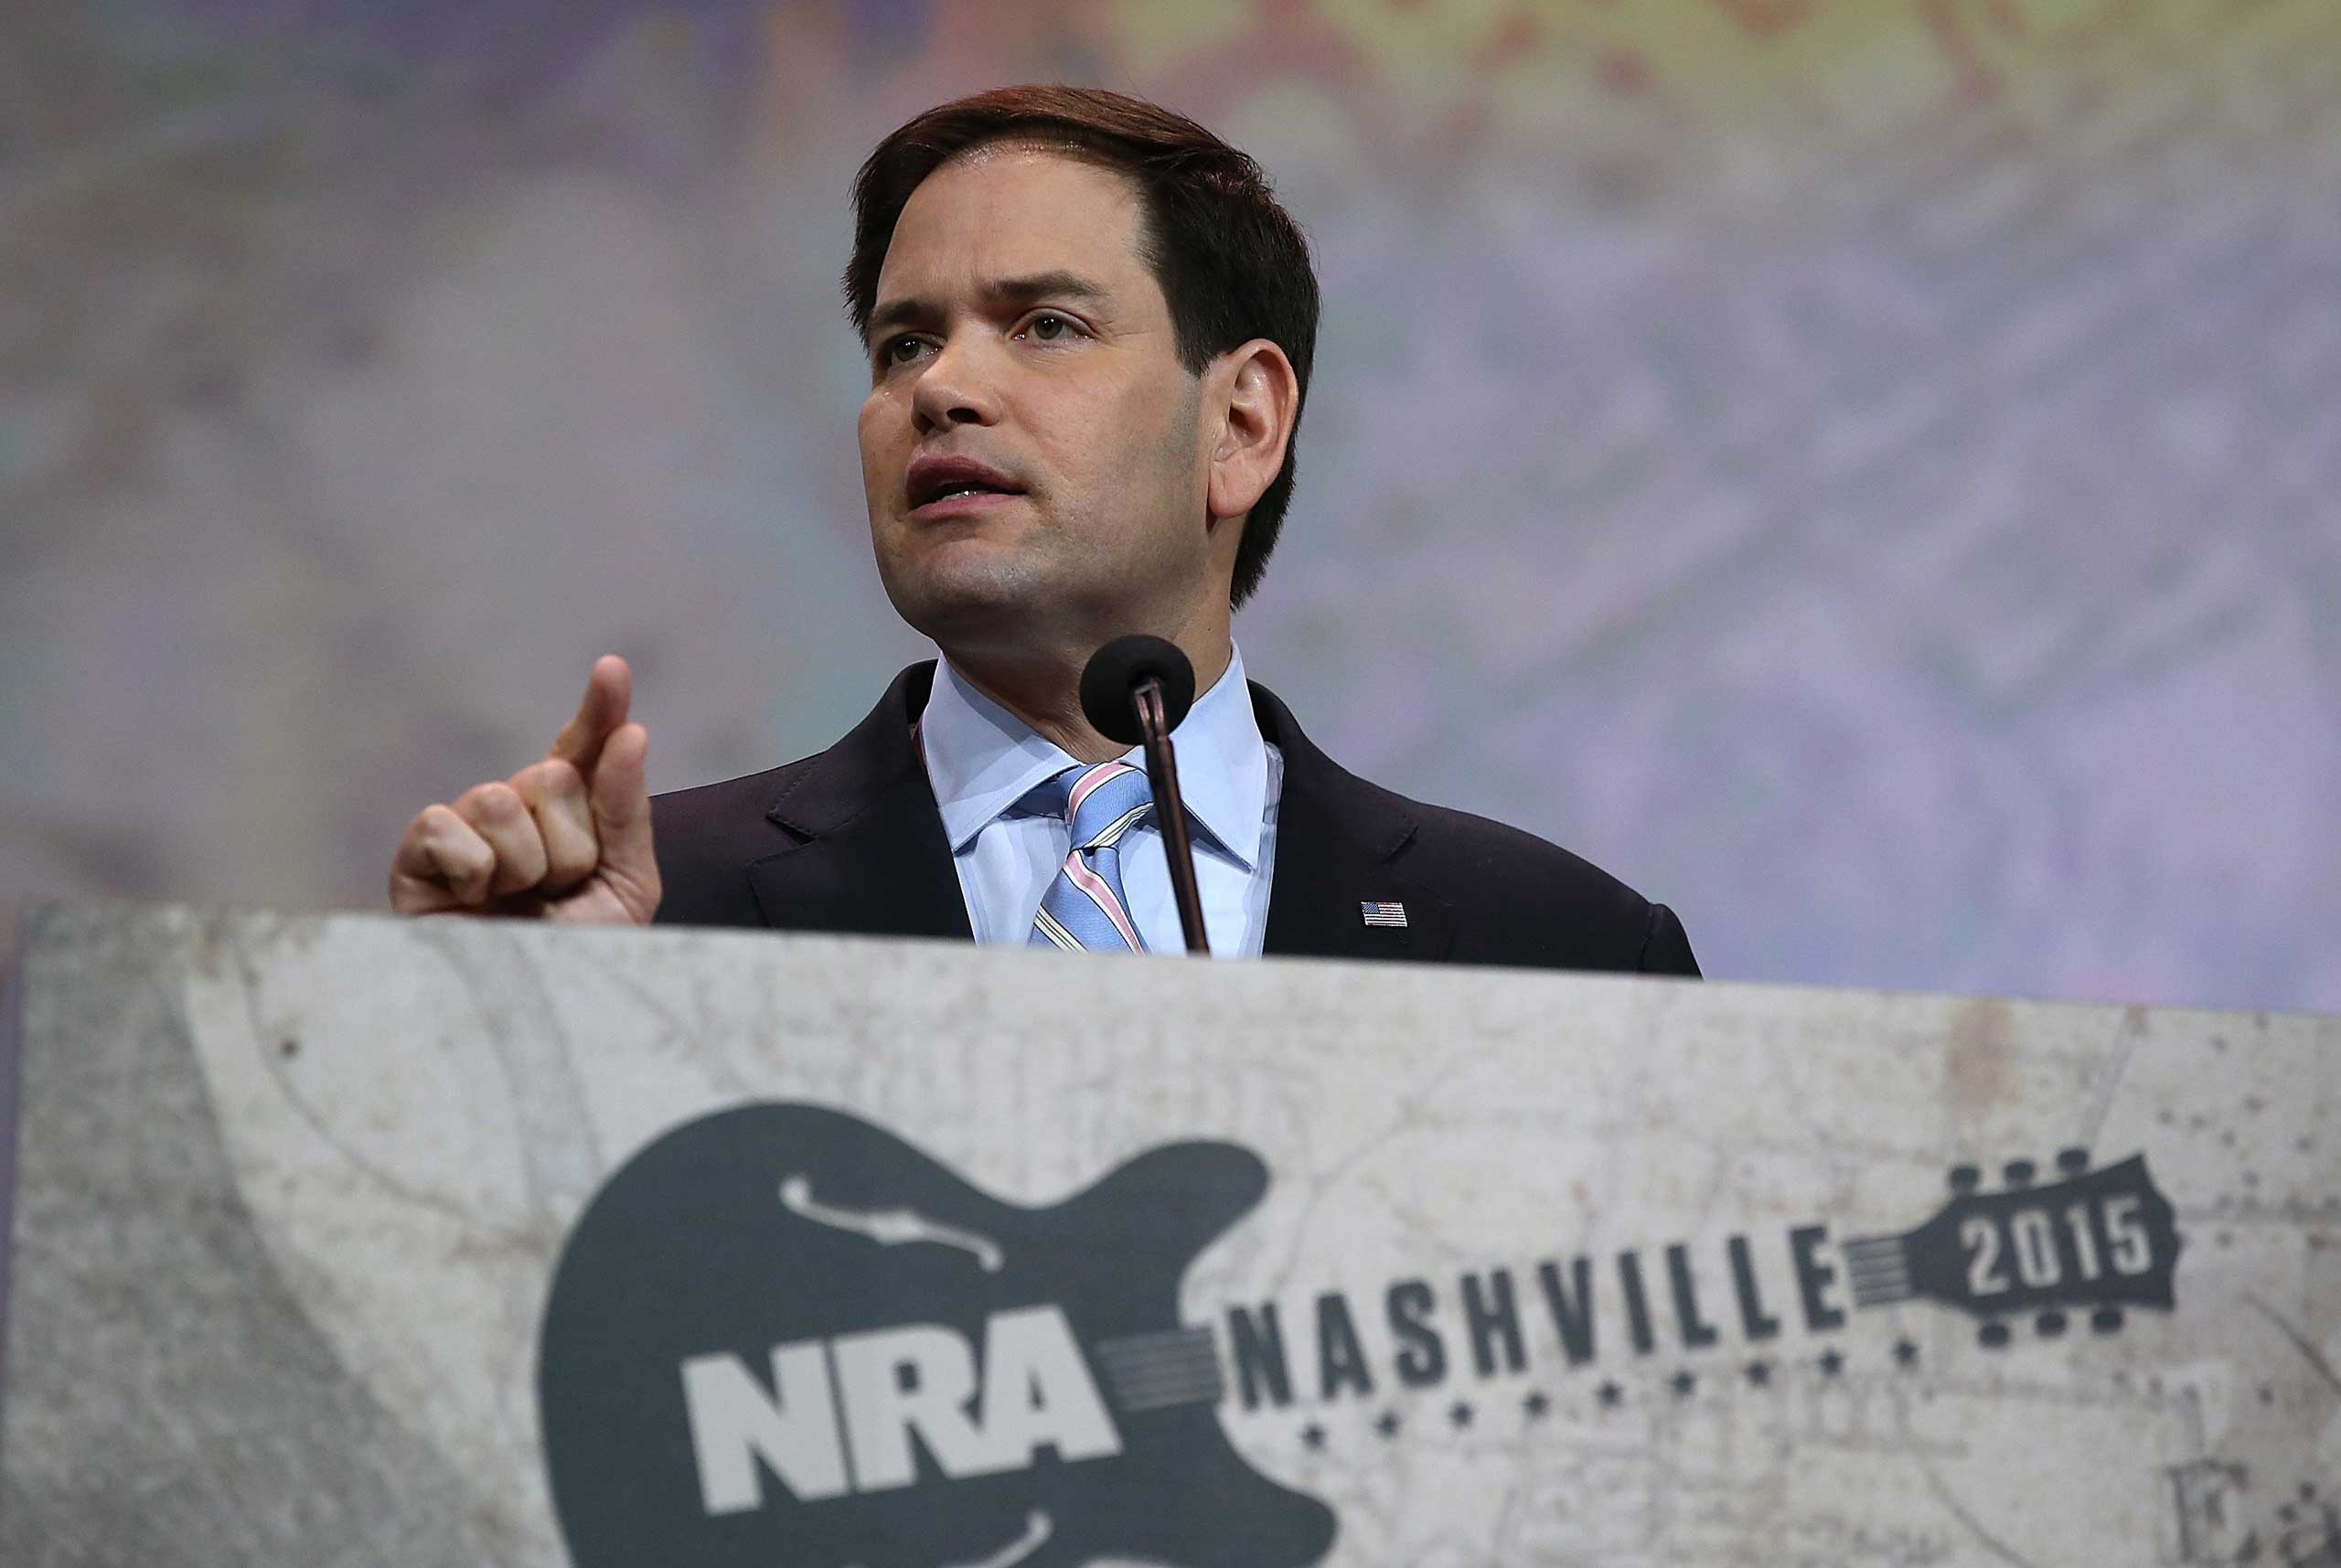 Sen. Marco Rubio speaks during the NRA-ILA Leadership Forum at the 2015 NRA Annual Meeting  in Nashville on Apr. 10, 2015.